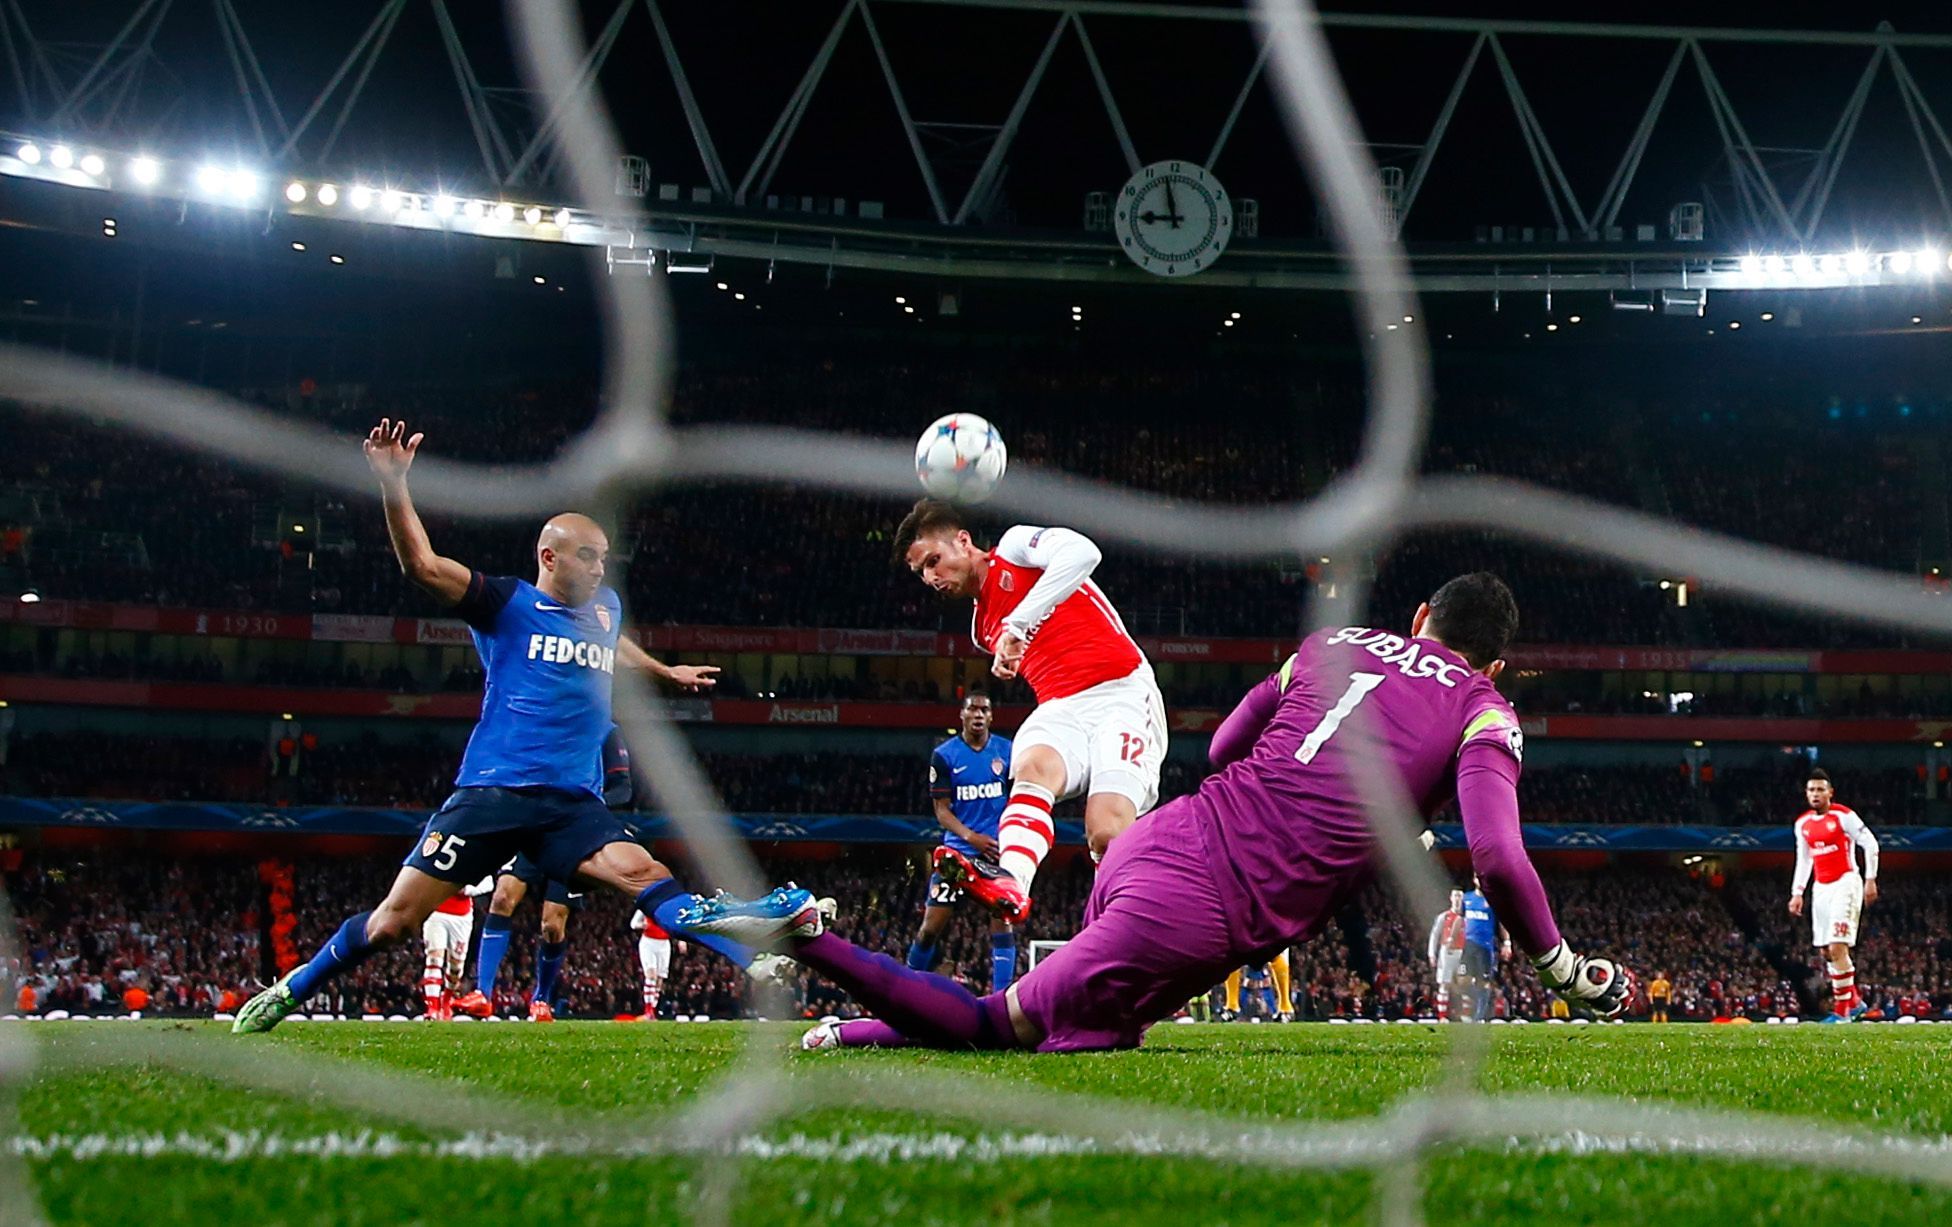 Football: Arsenal's Olivier Giroud misses a chance to score